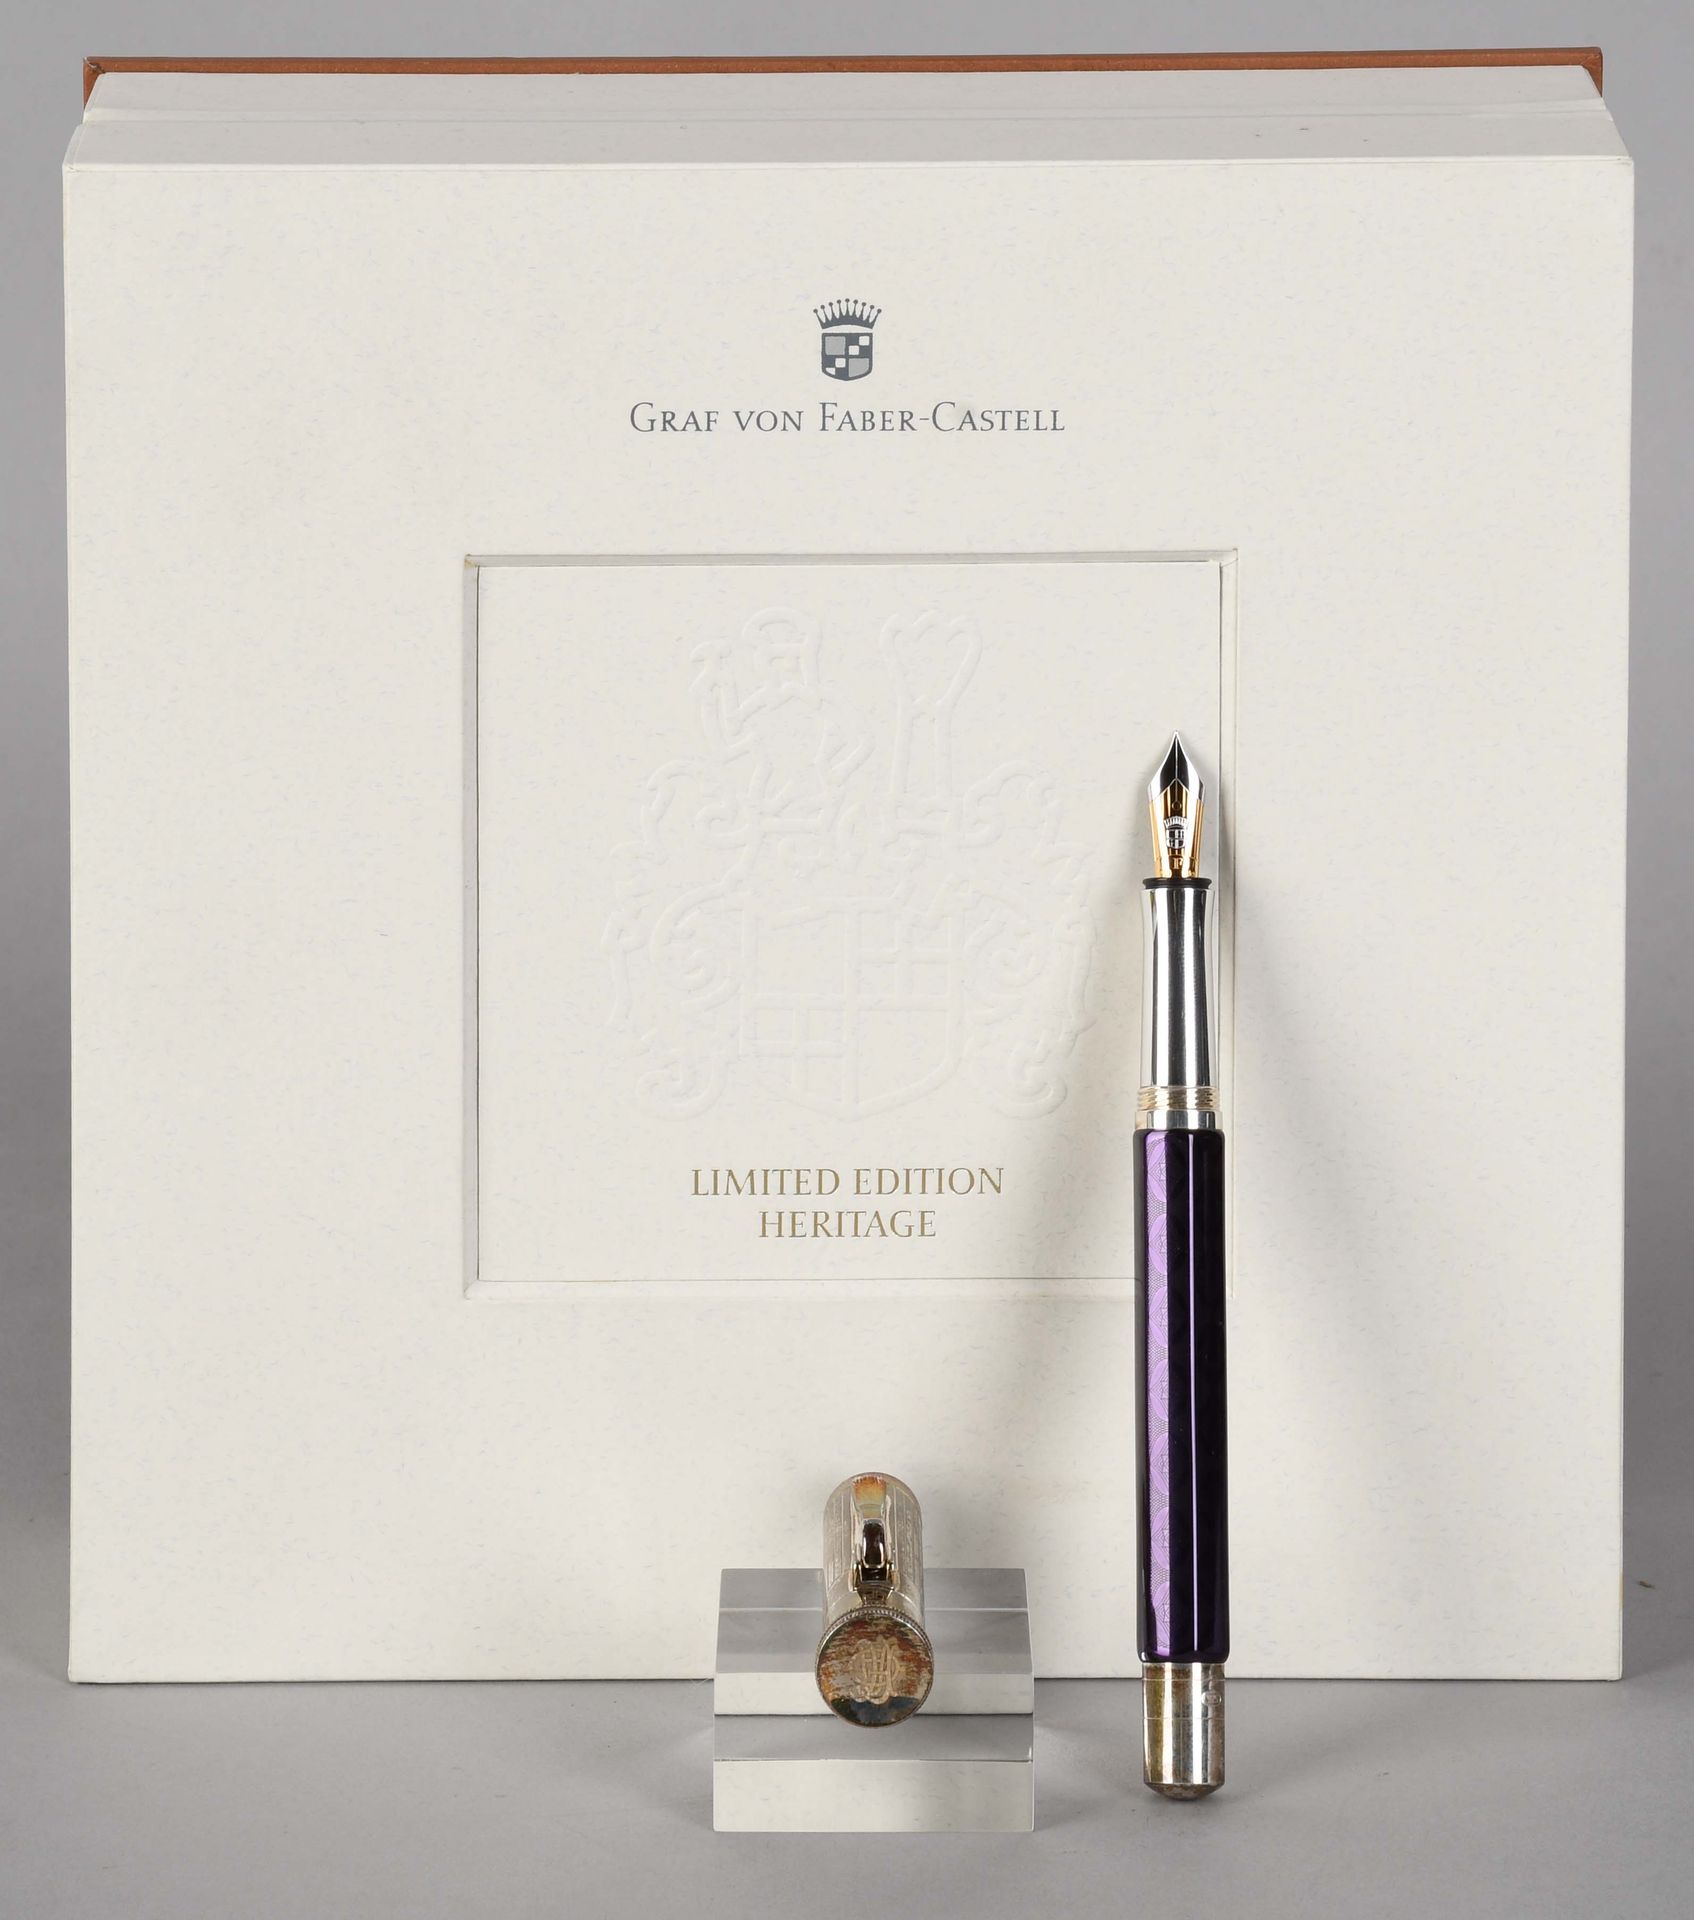 Null Graf Von Faber-Castell

Silver and lacquer fountain pen. Limited edition He&hellip;